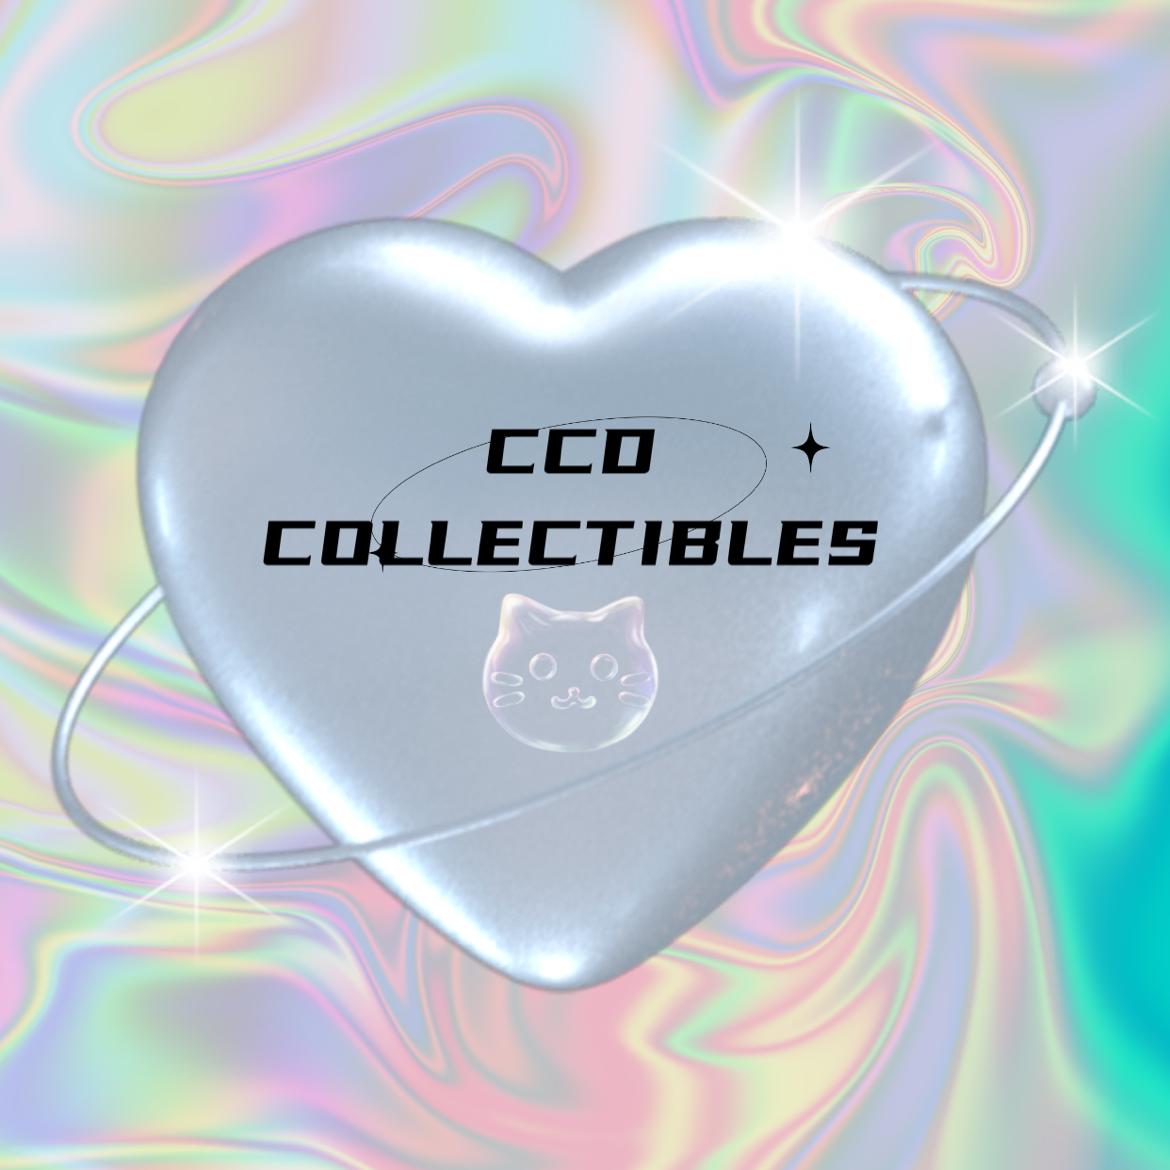 ccdcollectibles's images